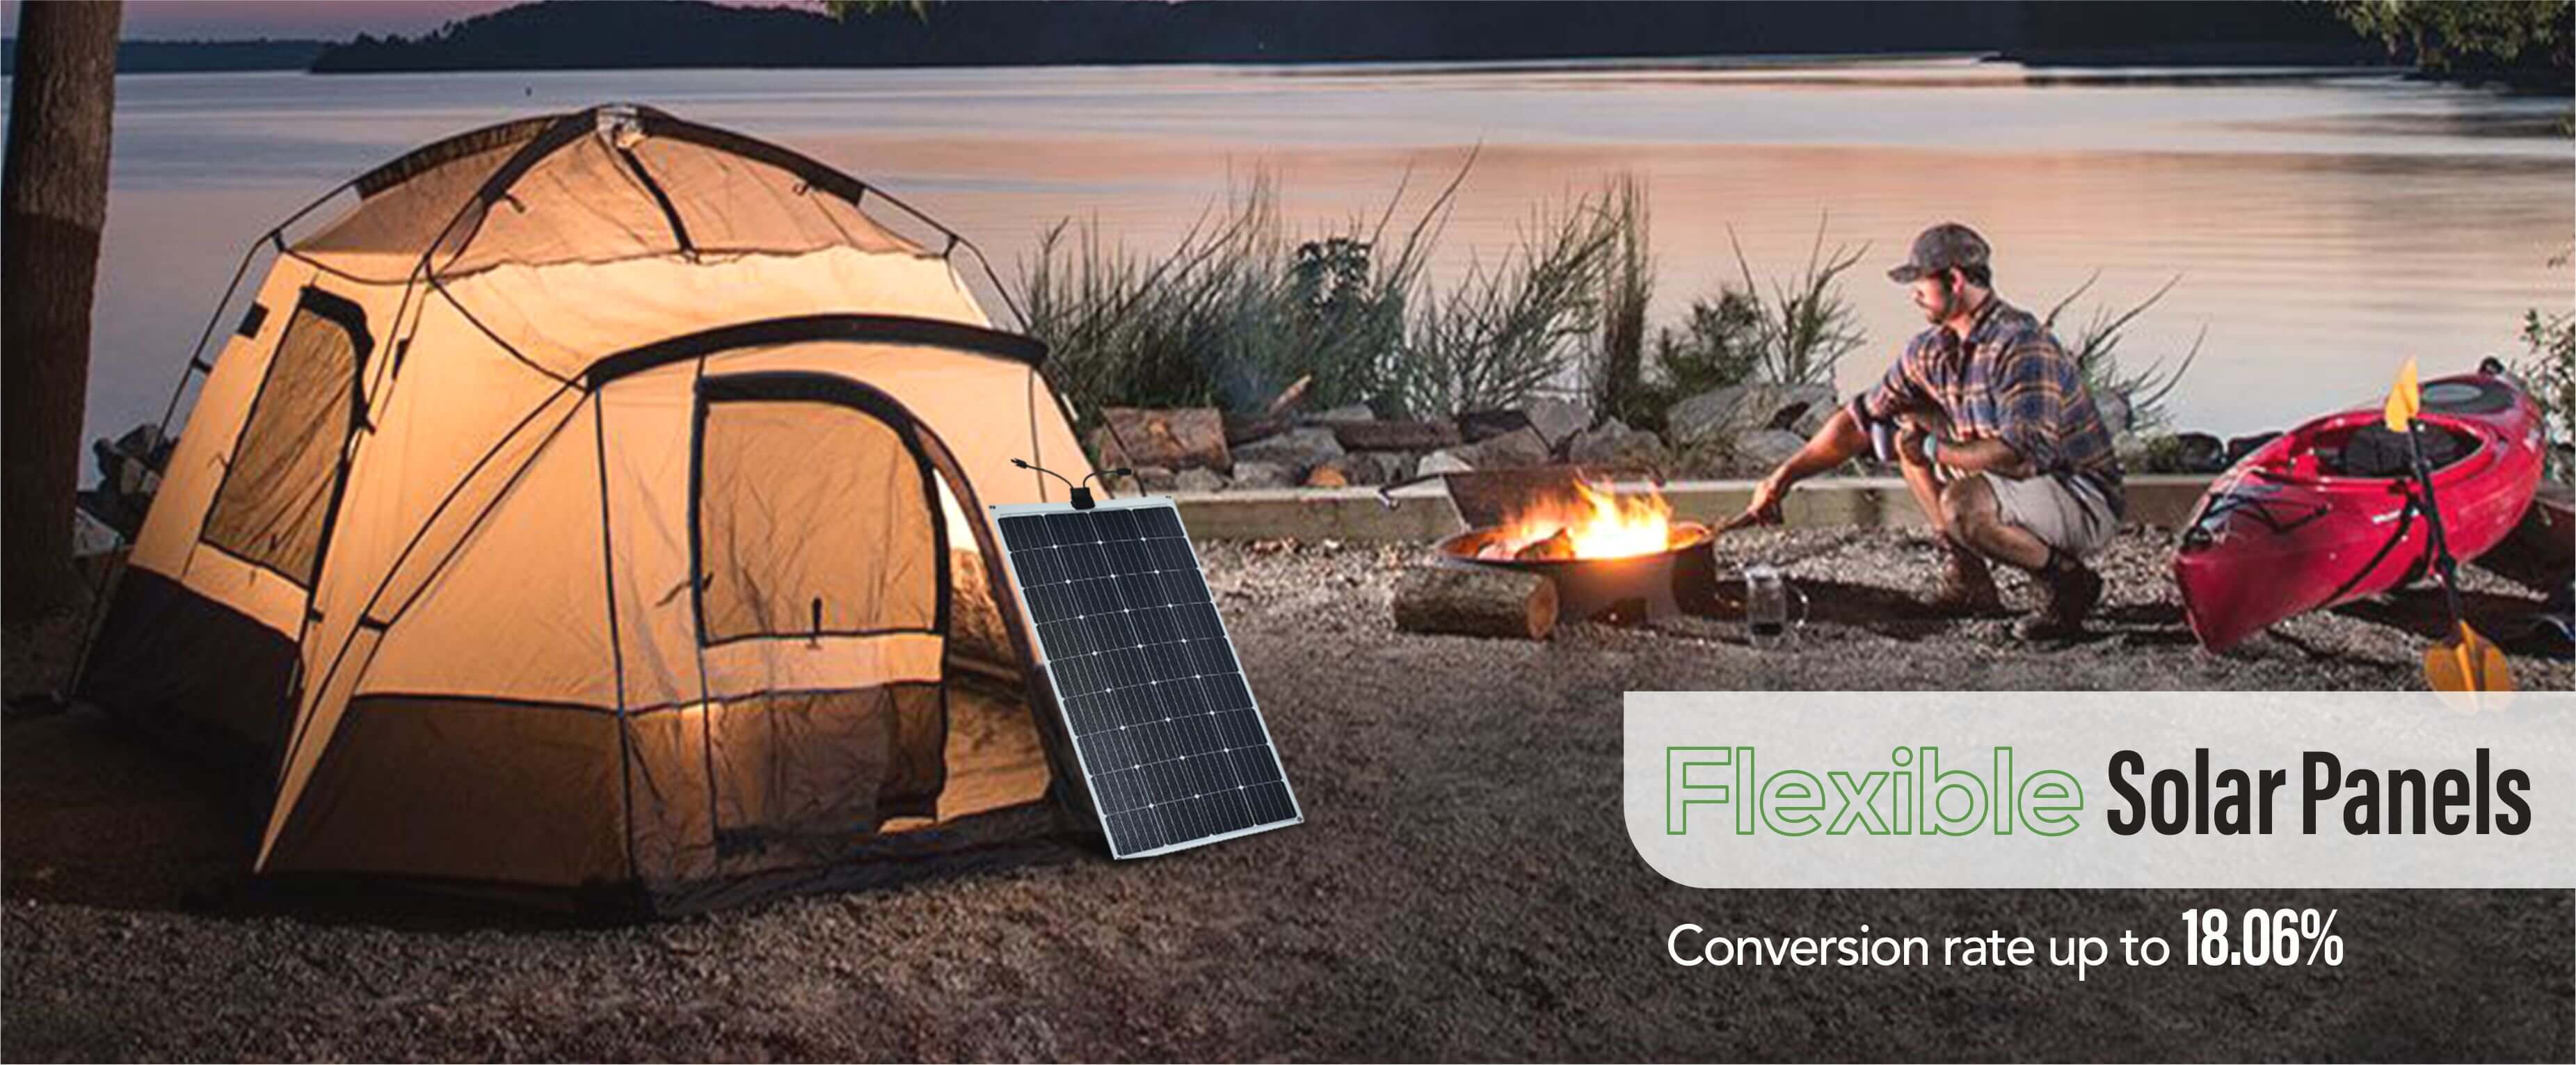 flexible solar panels for Camping